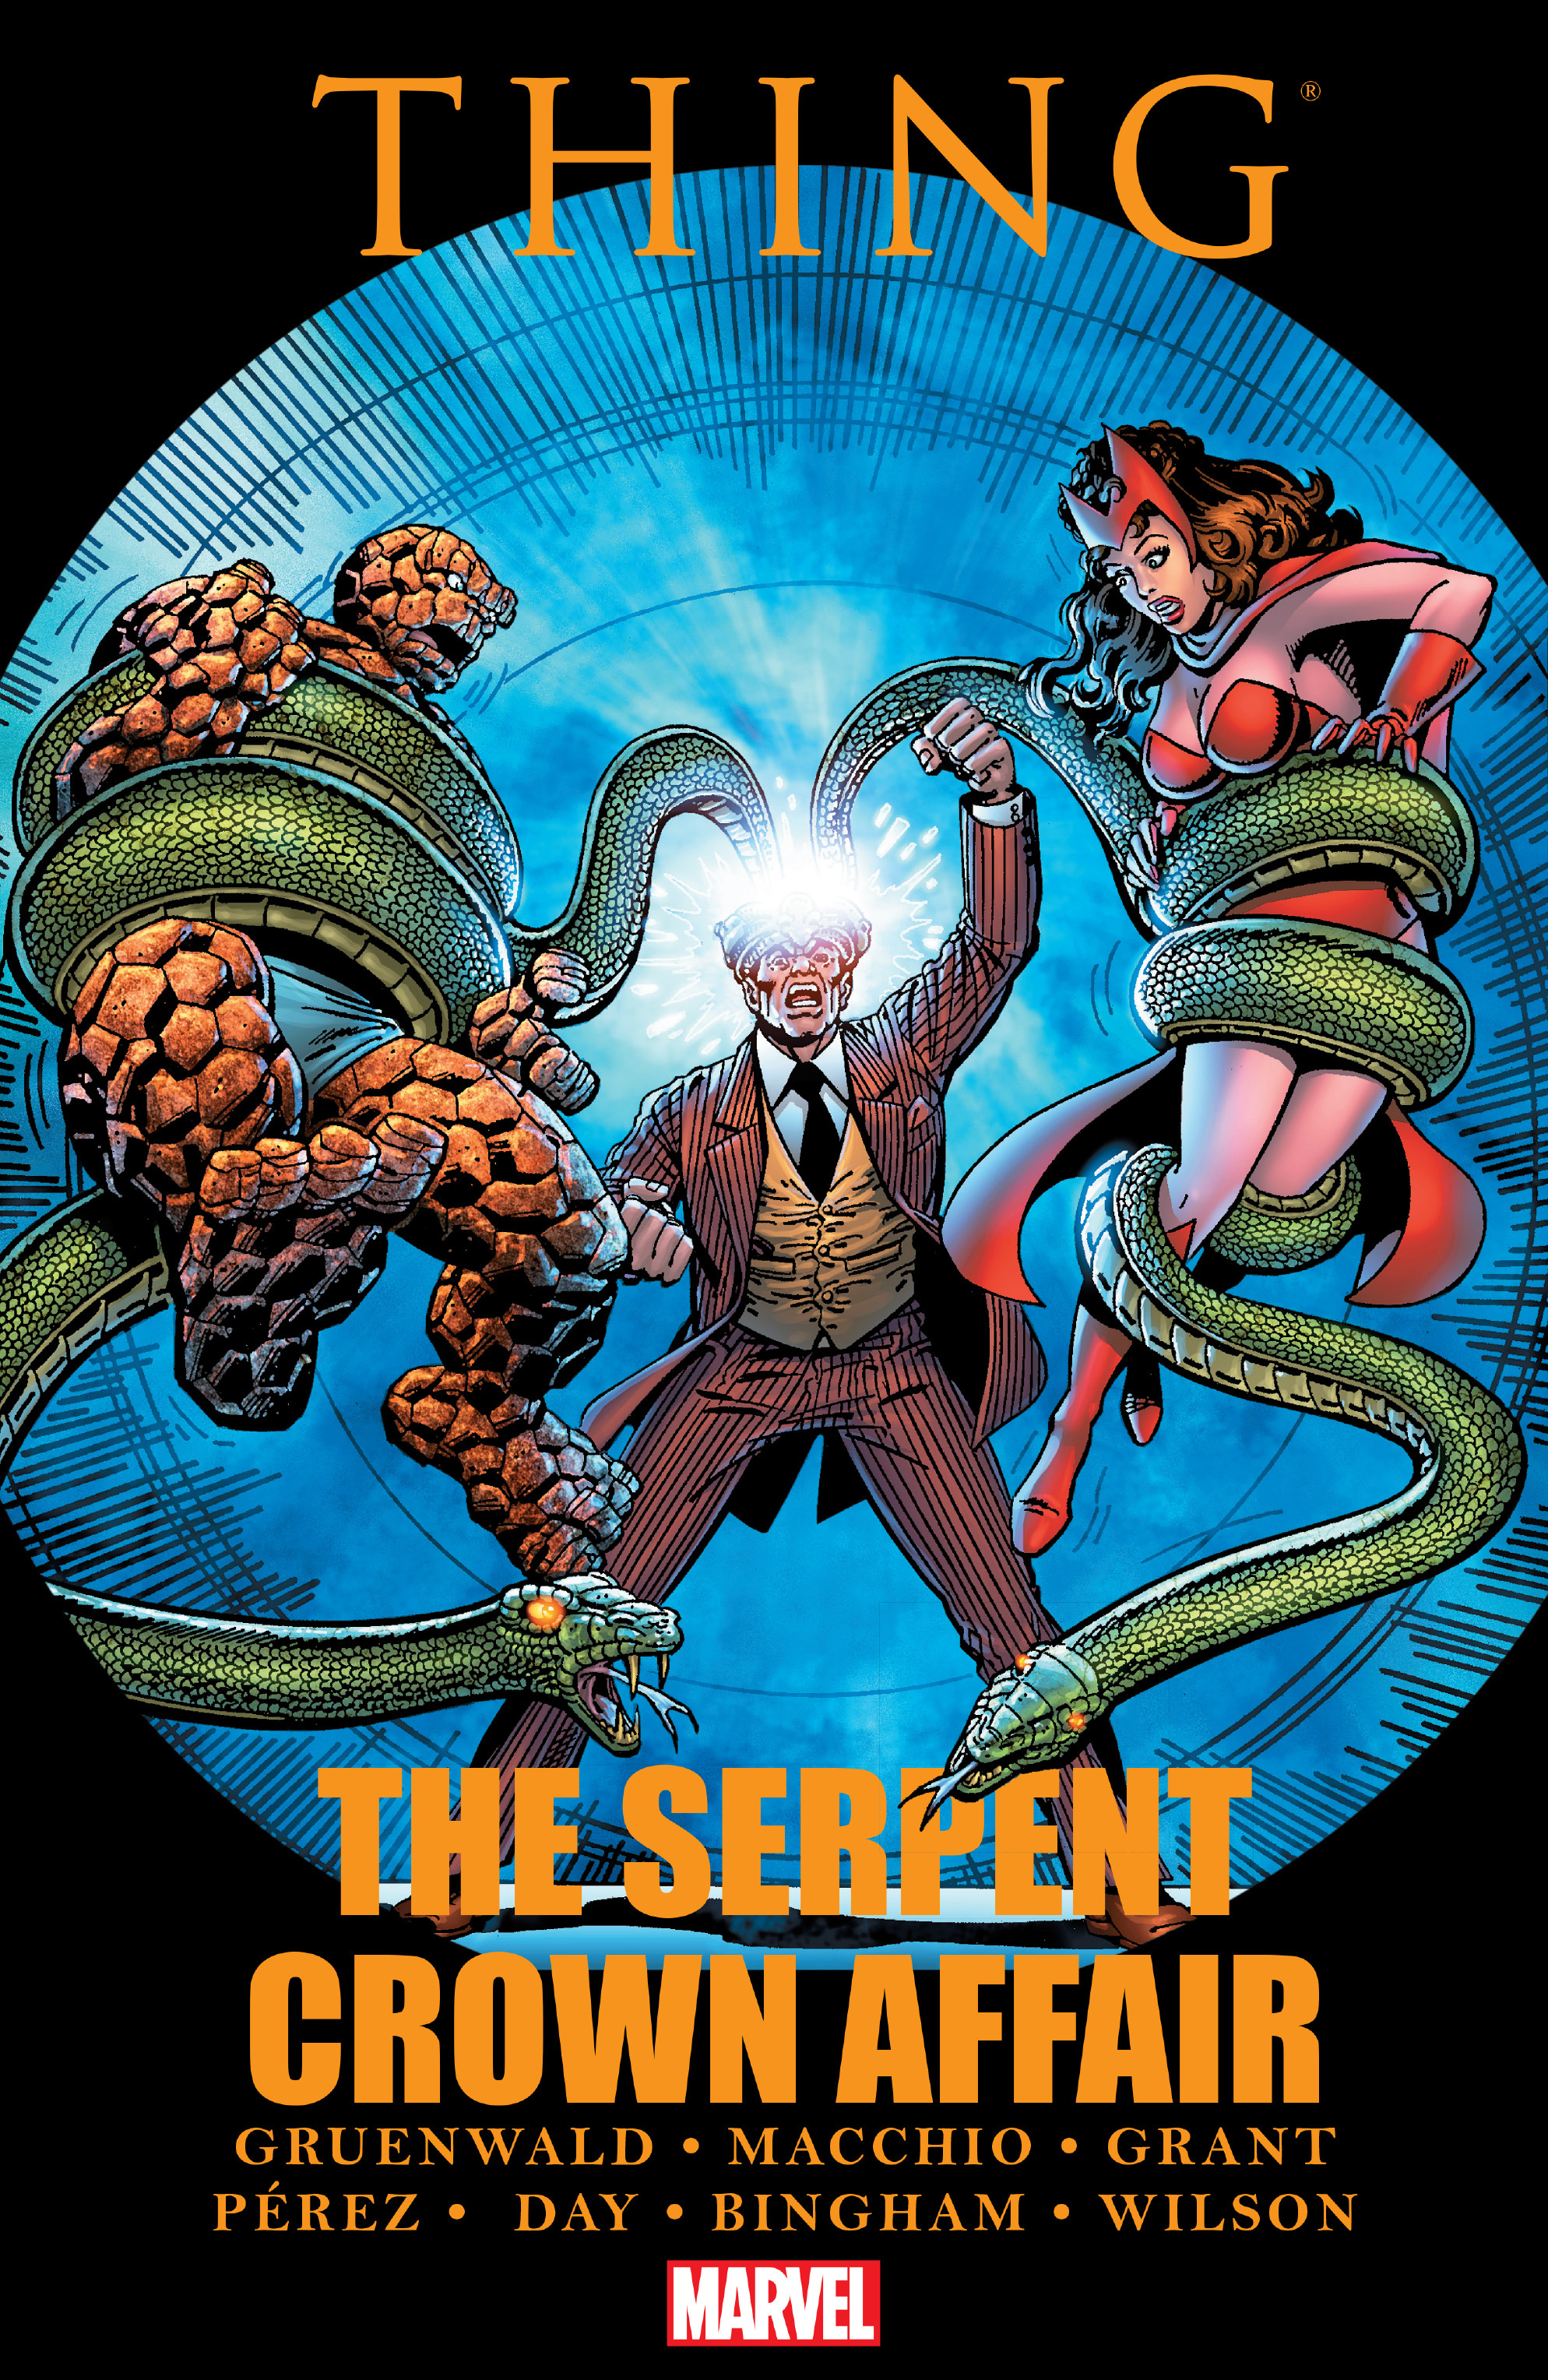 Read online Thing: The Serpent Crown Affair comic -  Issue # TPB - 1